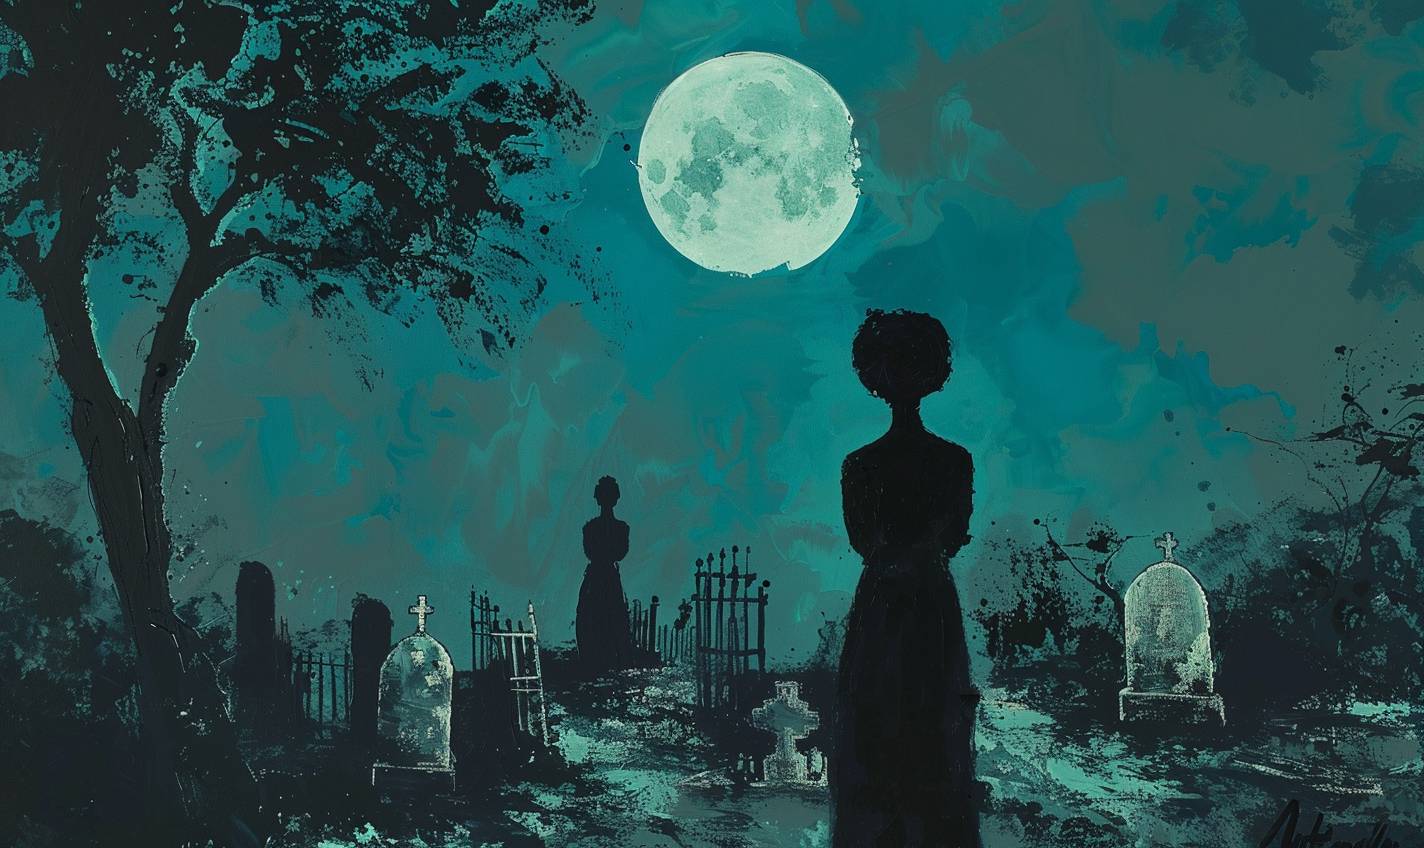 In the style of Amy Sherald, an eerie cemetery on a moonlit night